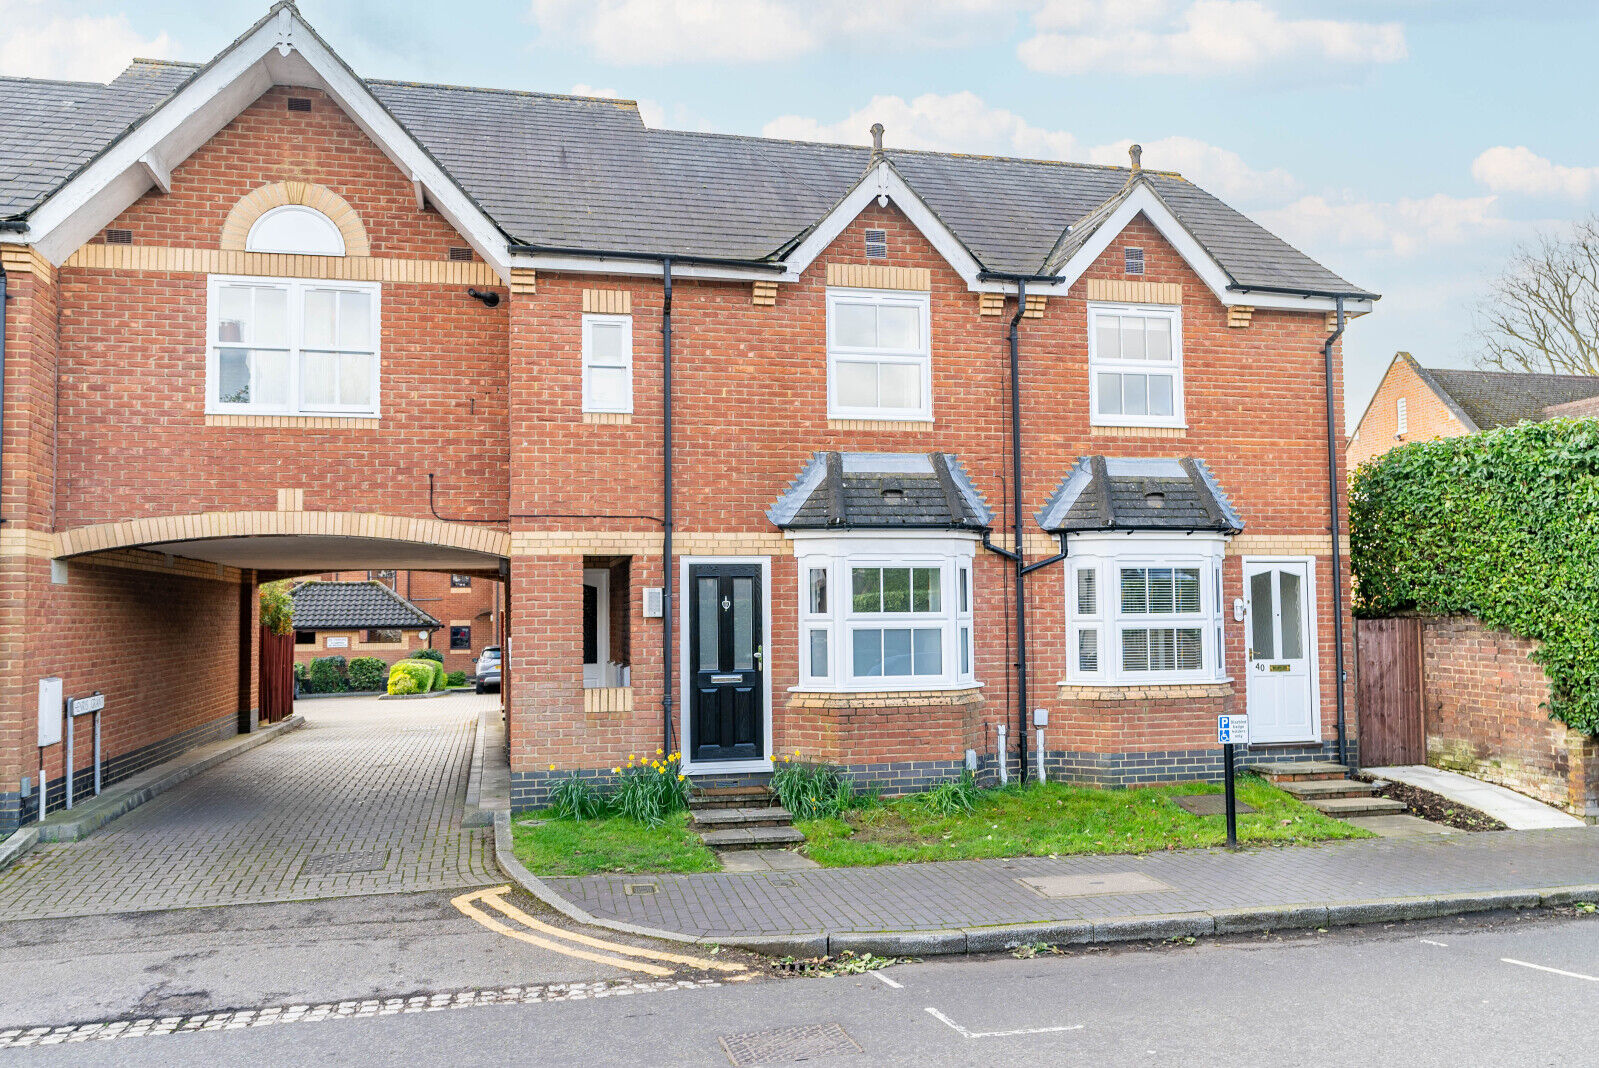 2 bedroom mid terraced house for sale Old London Road, St. Albans, AL1, main image